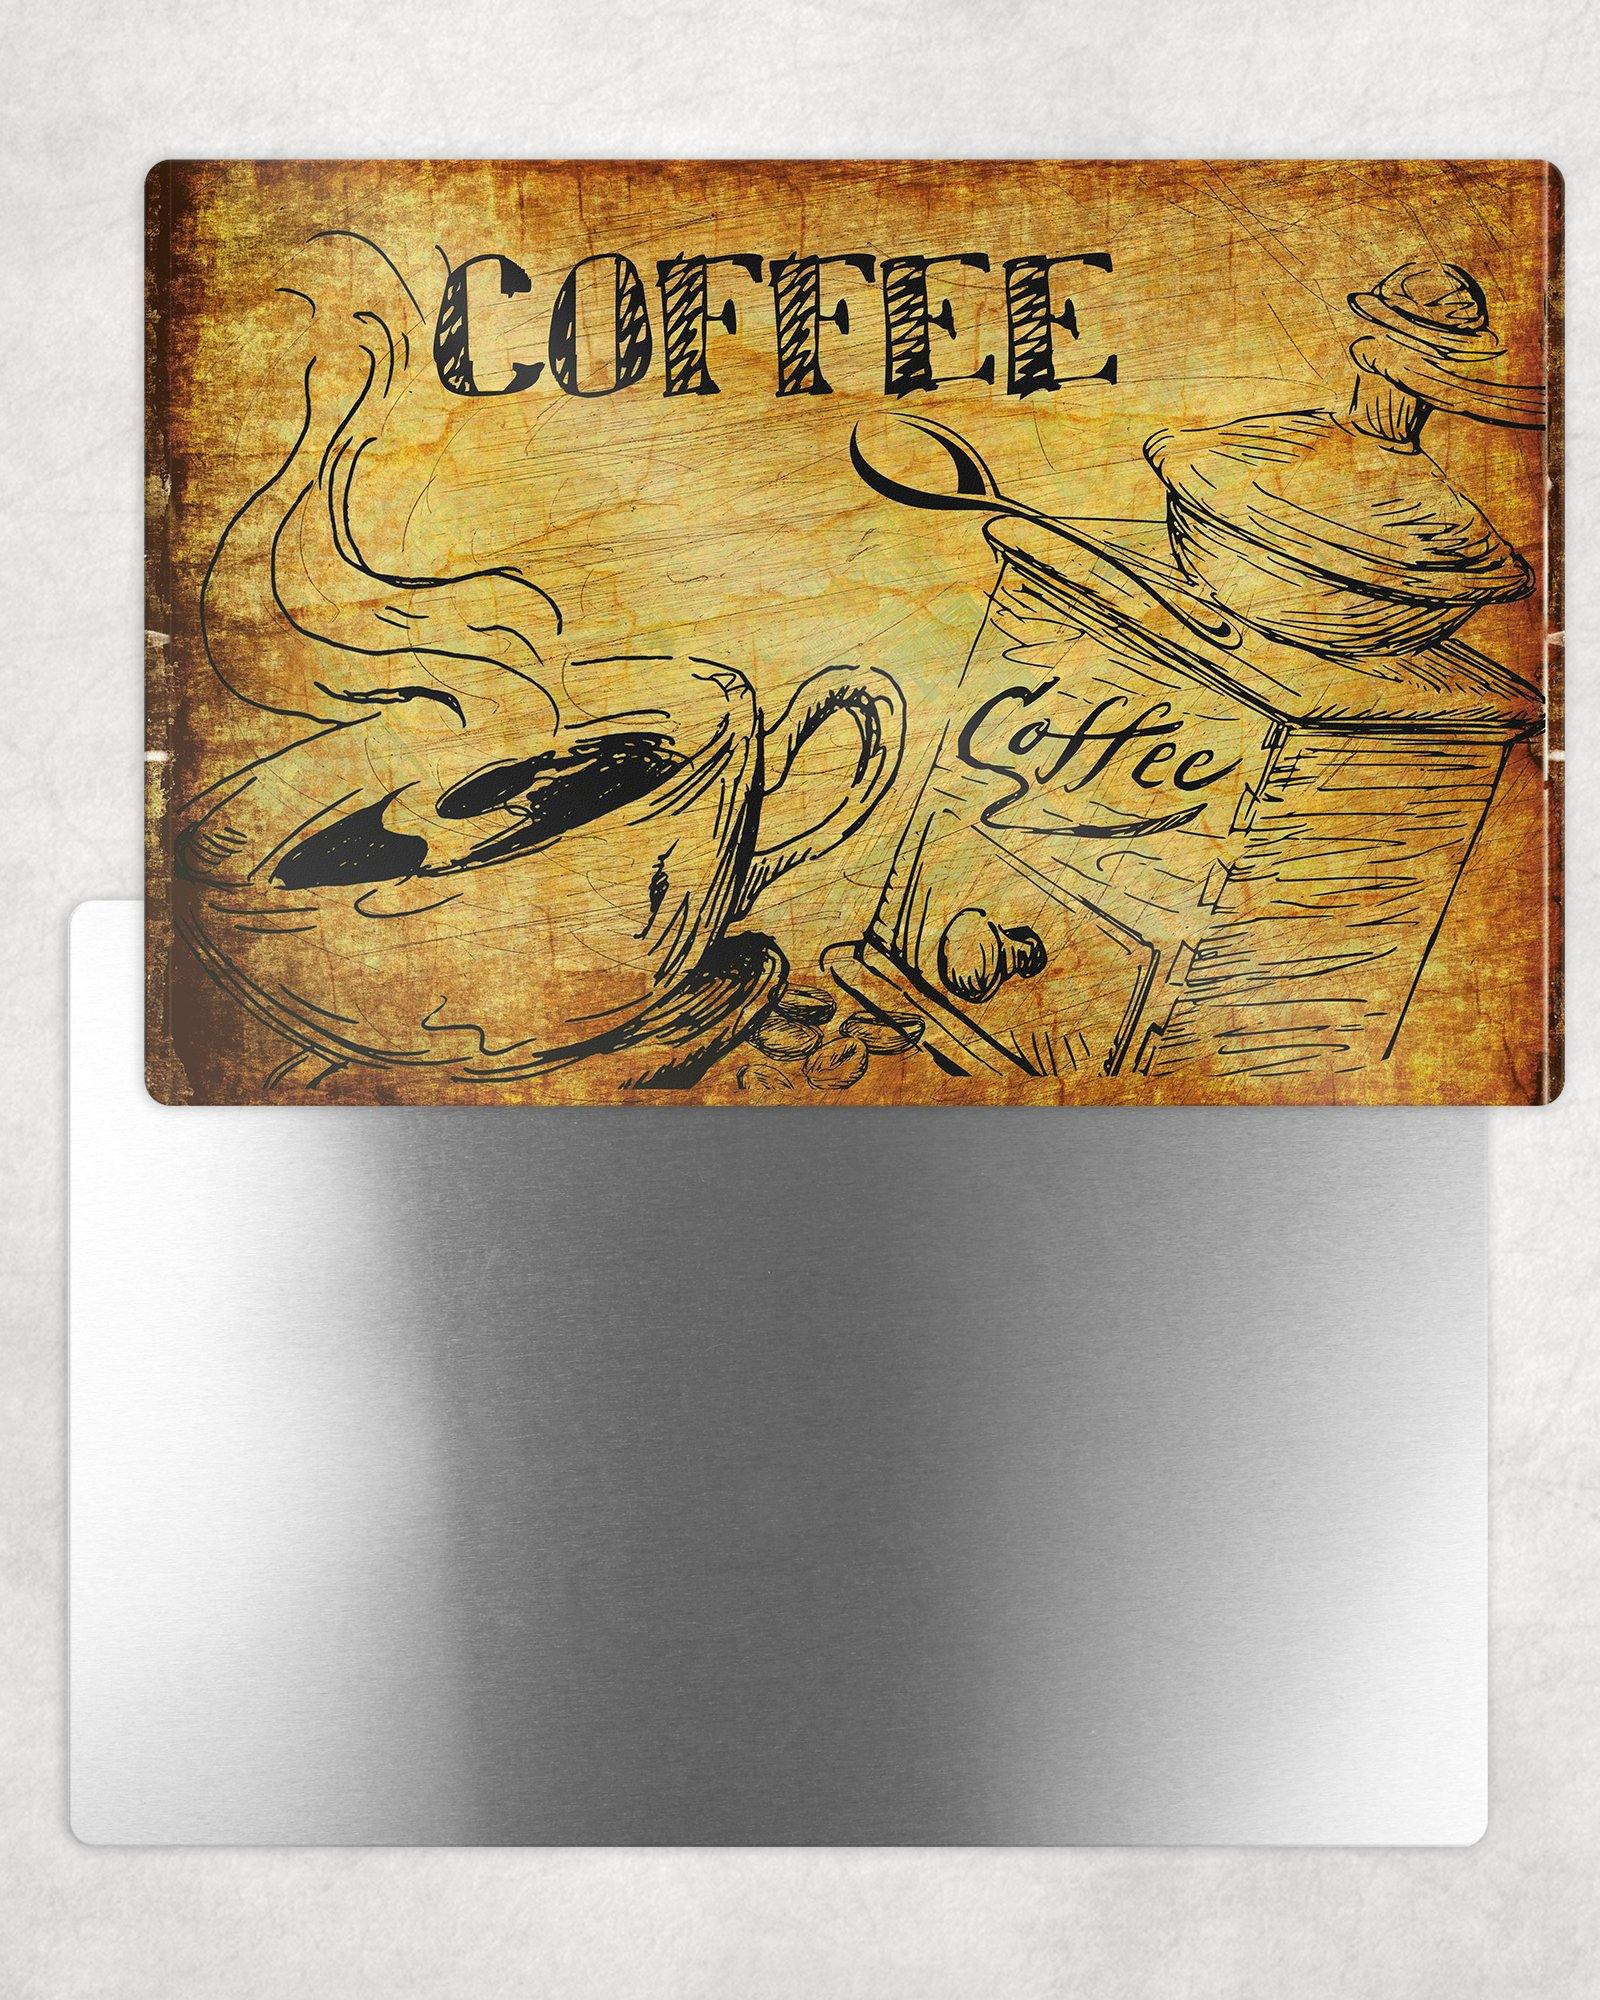 Vintage Look Coffee Sign Metal Photo Panel - 8x12 or 12x18 - Schoppix Gifts